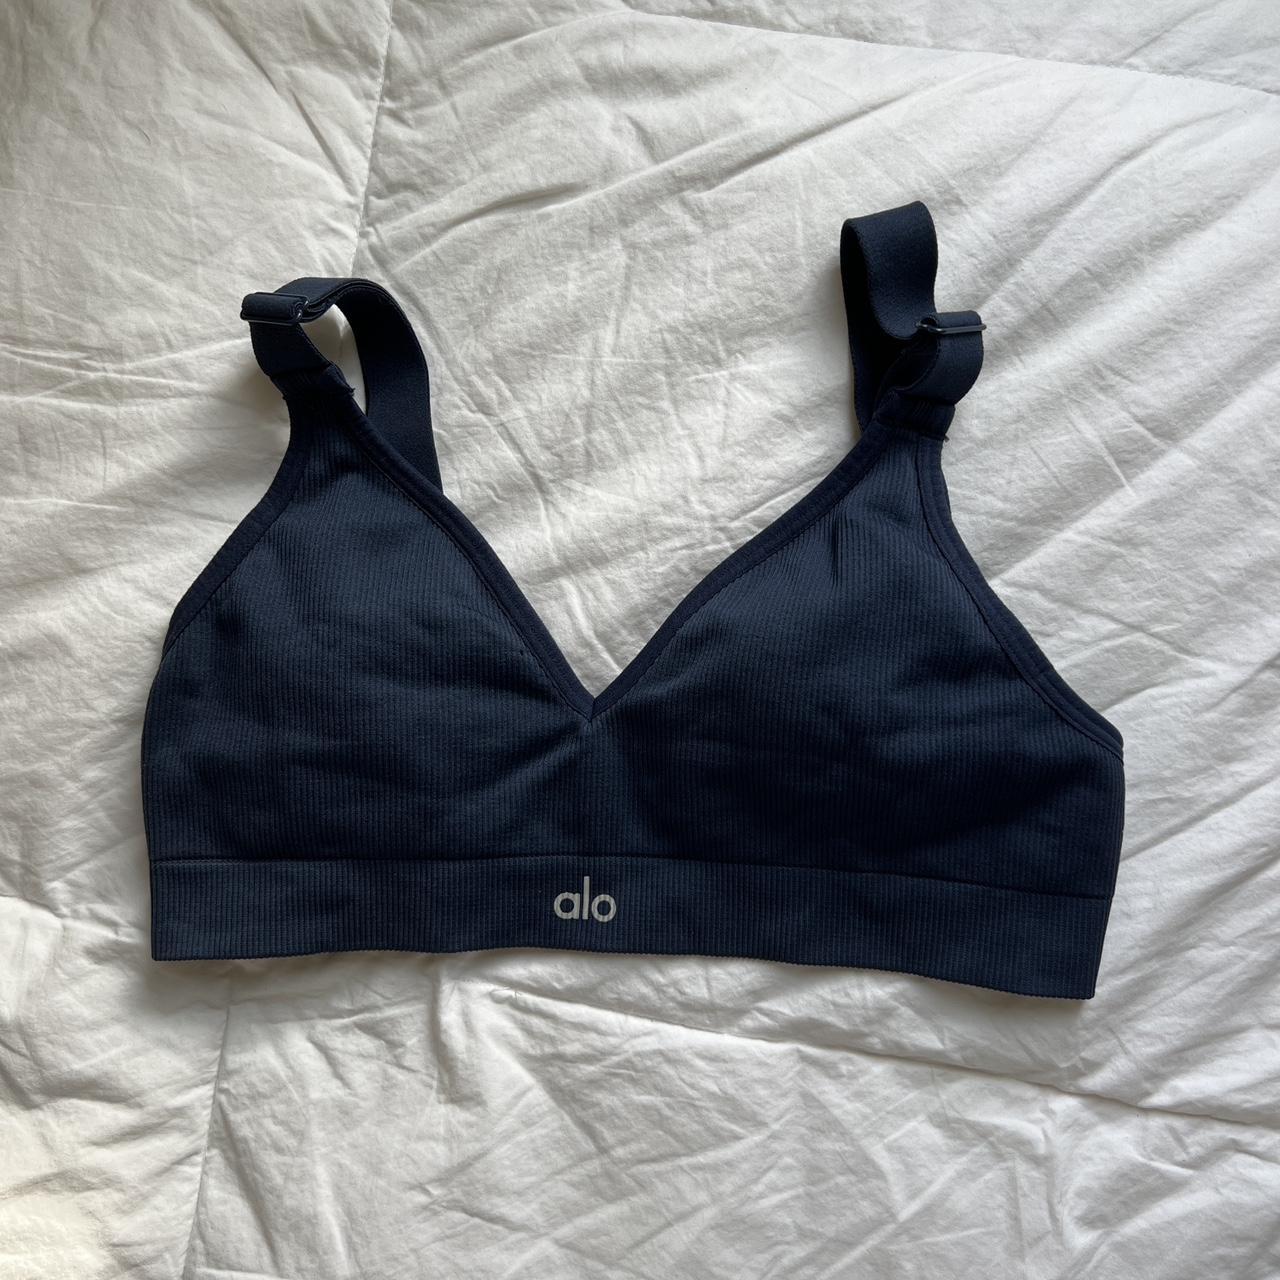 small, Alo sports bra, navy blue, took the cups - Depop